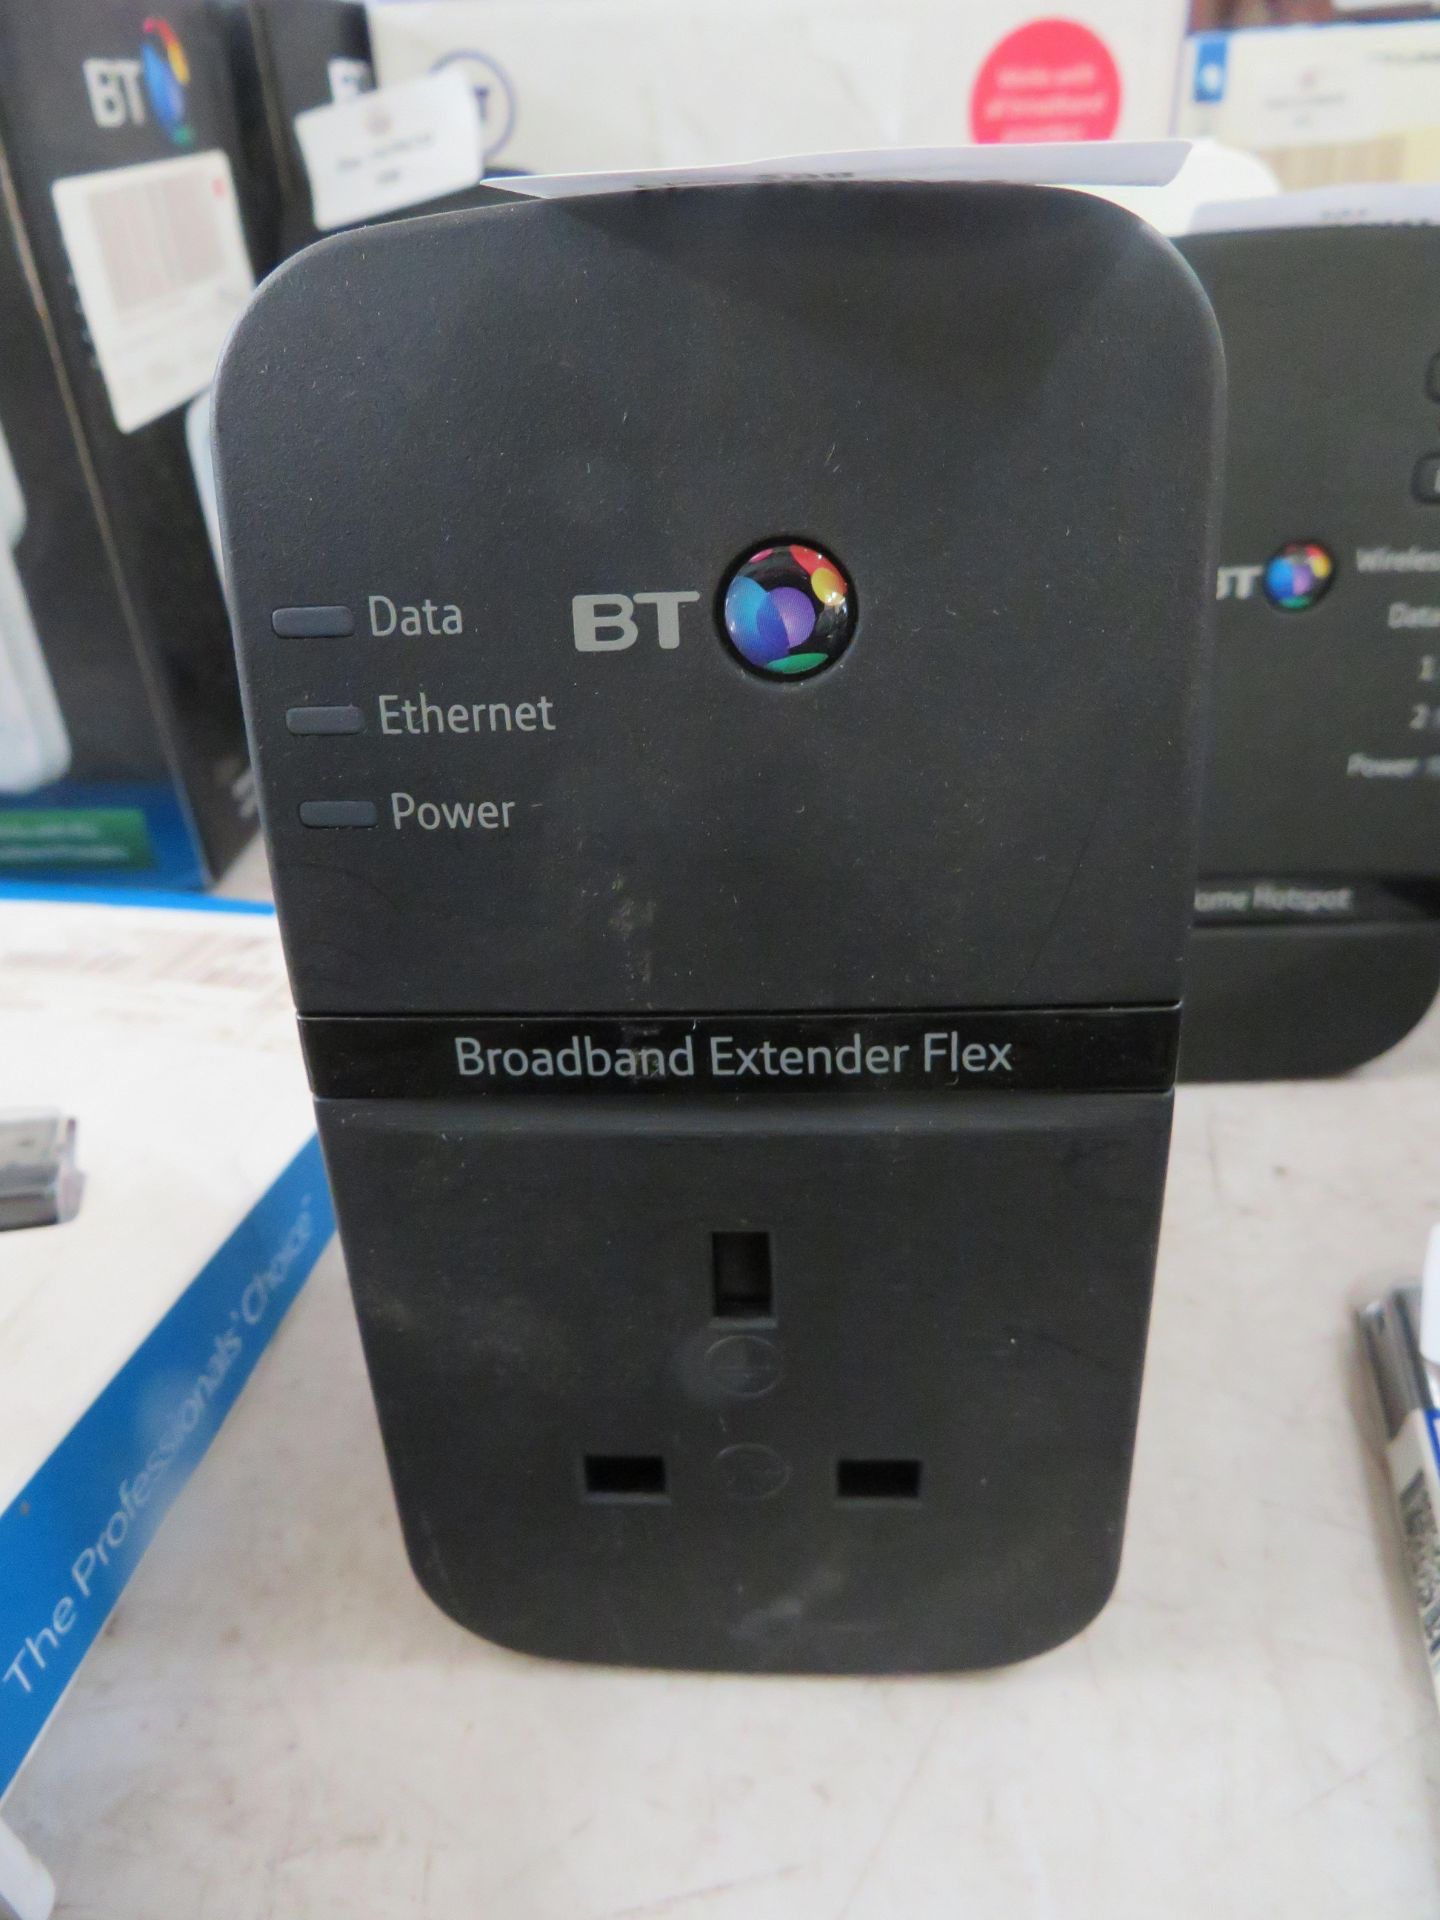 BT broadband extender flex 500, looks to be main unit only, unchecked and no packaging